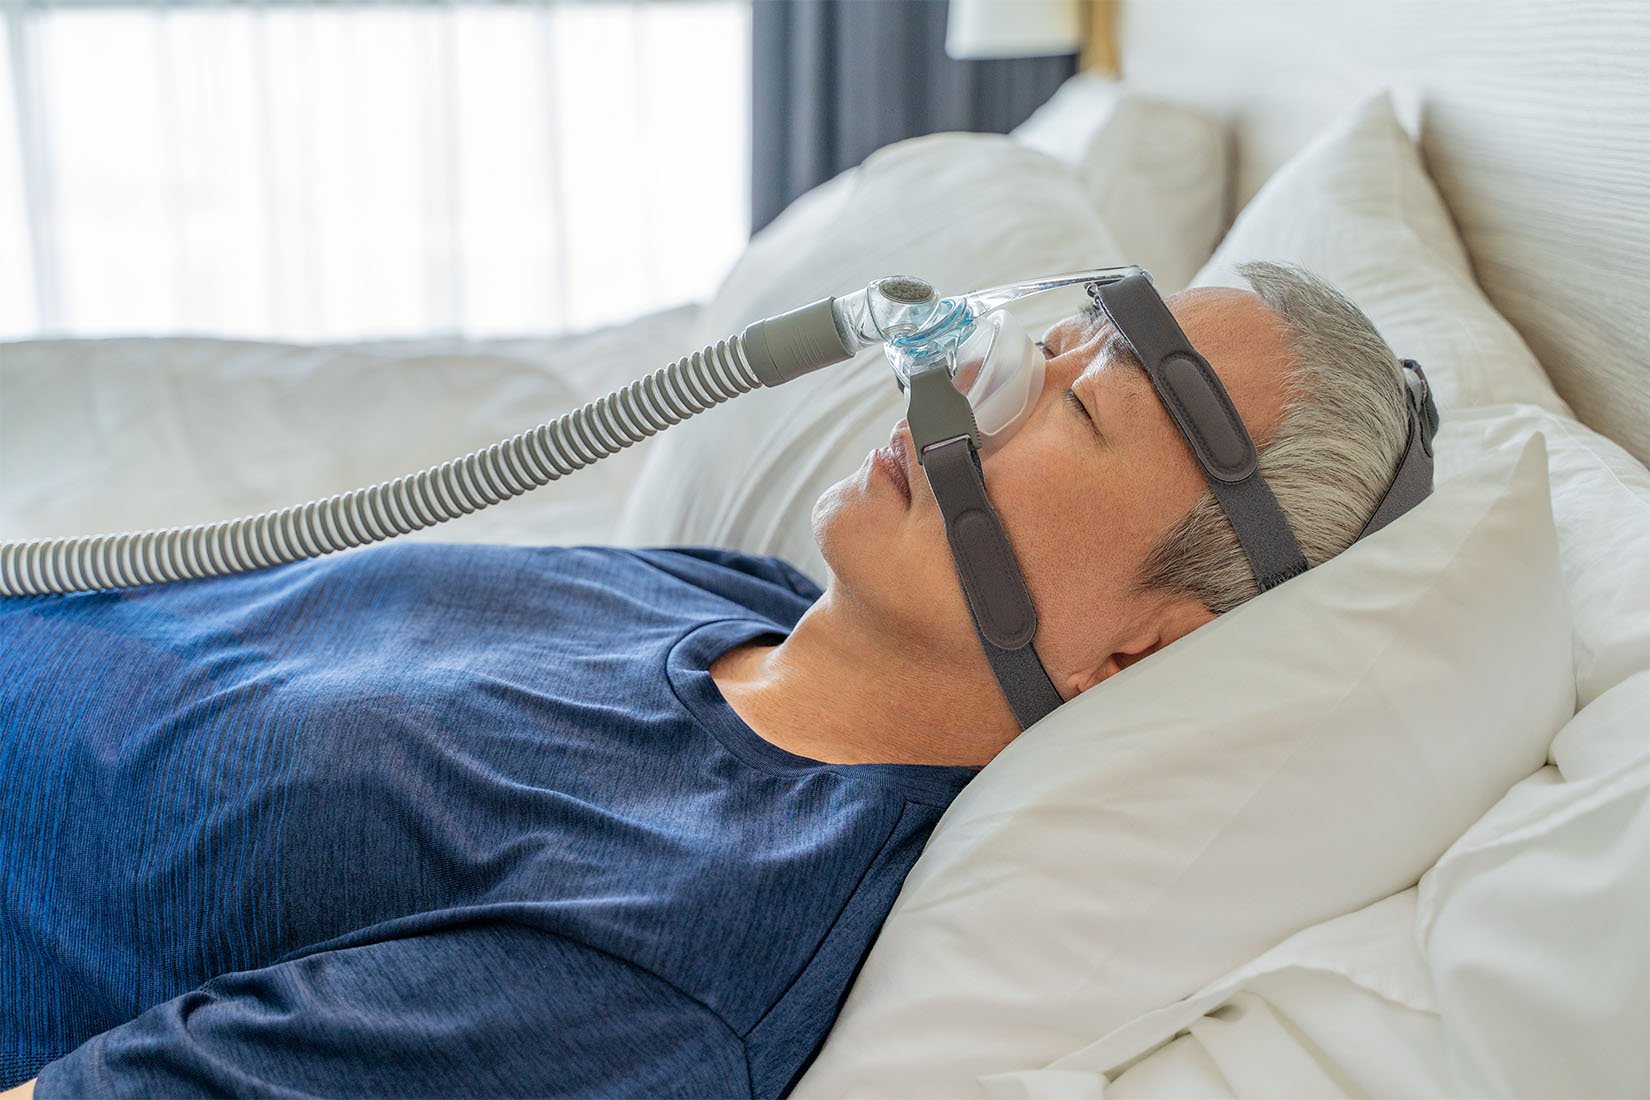 COVID-19 Severity May Be Increased for those with Sleep Apnea